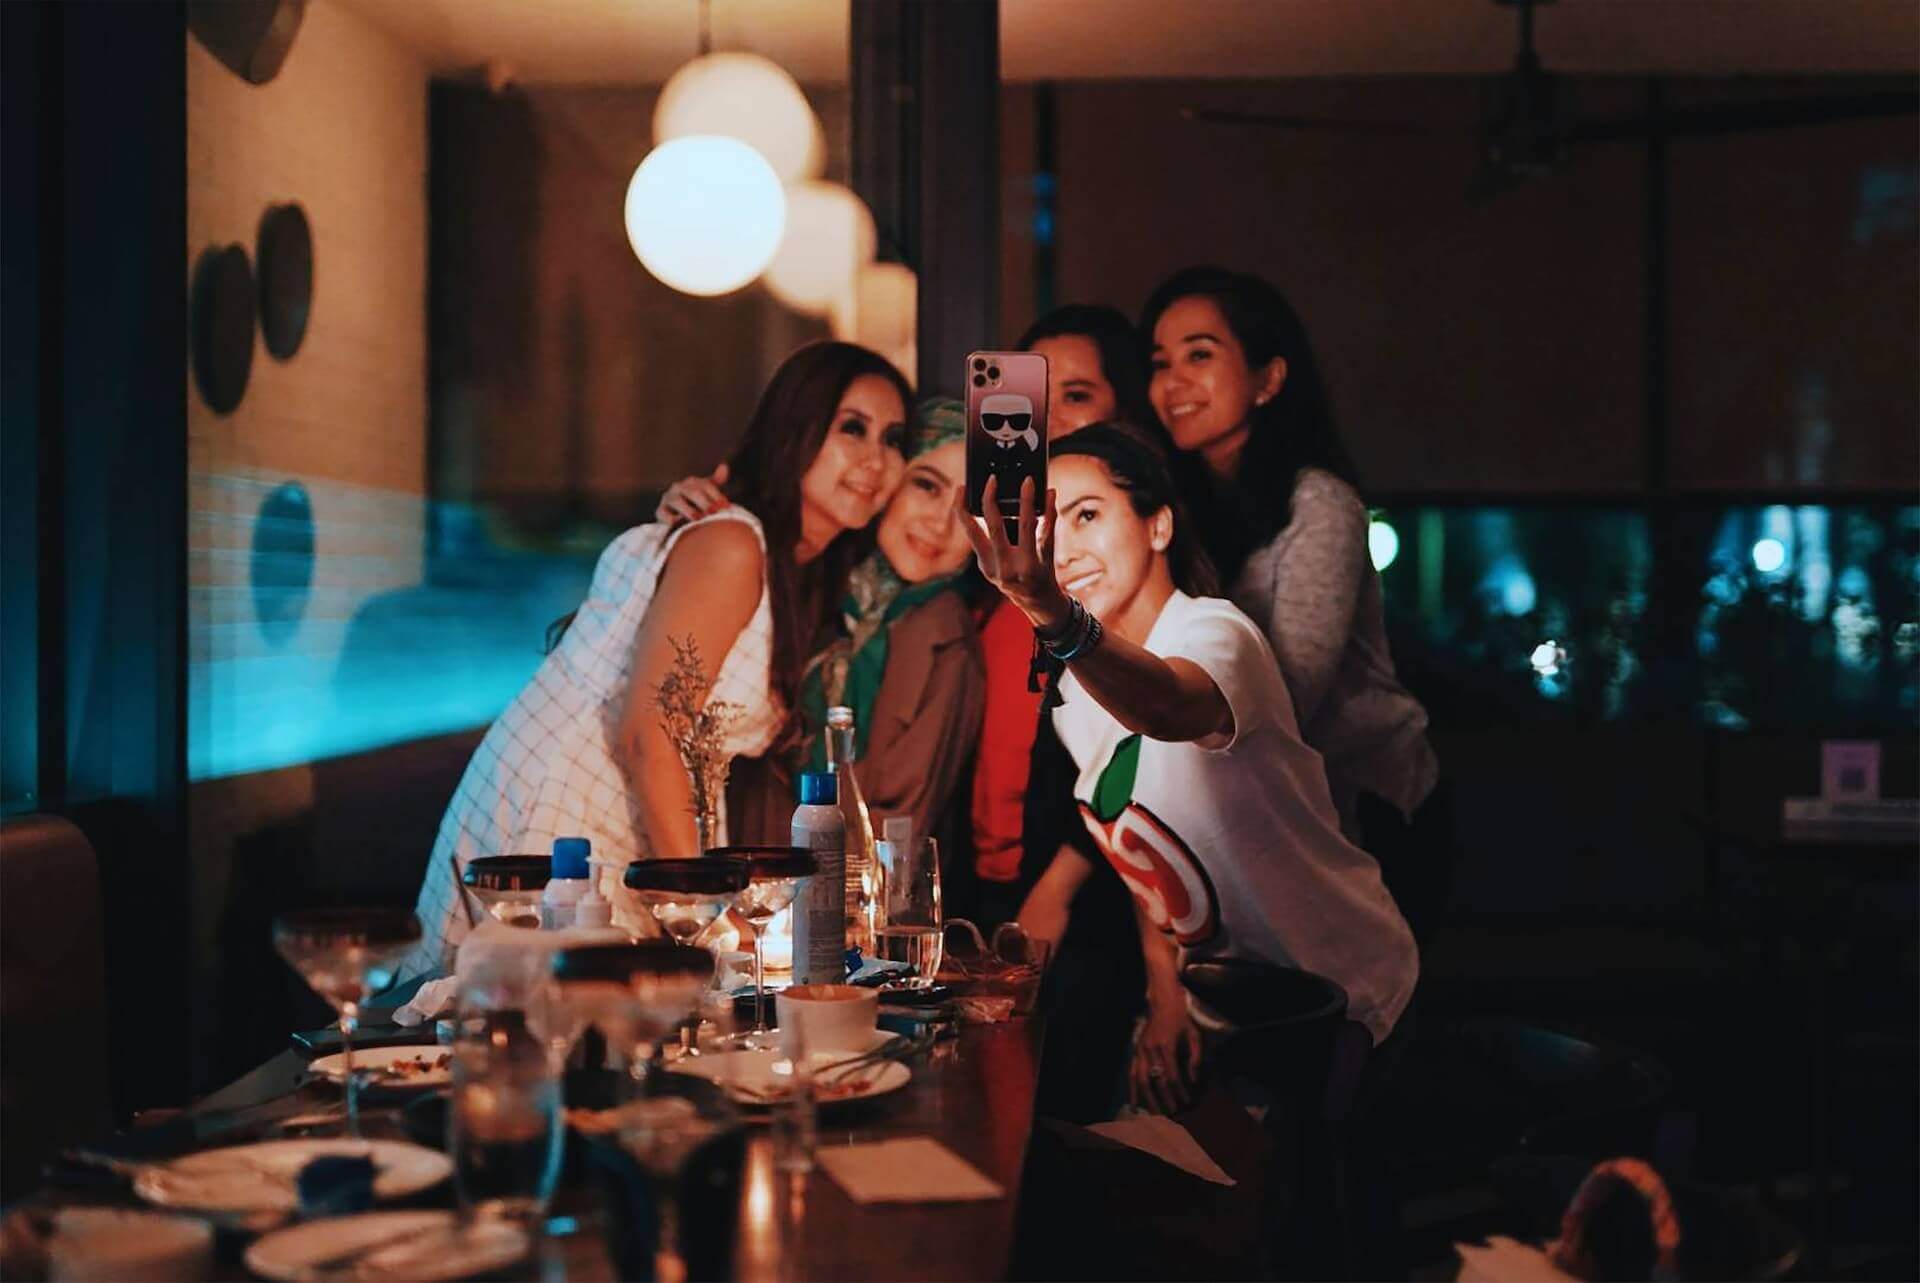 Women gather to take selfie at dinner party.